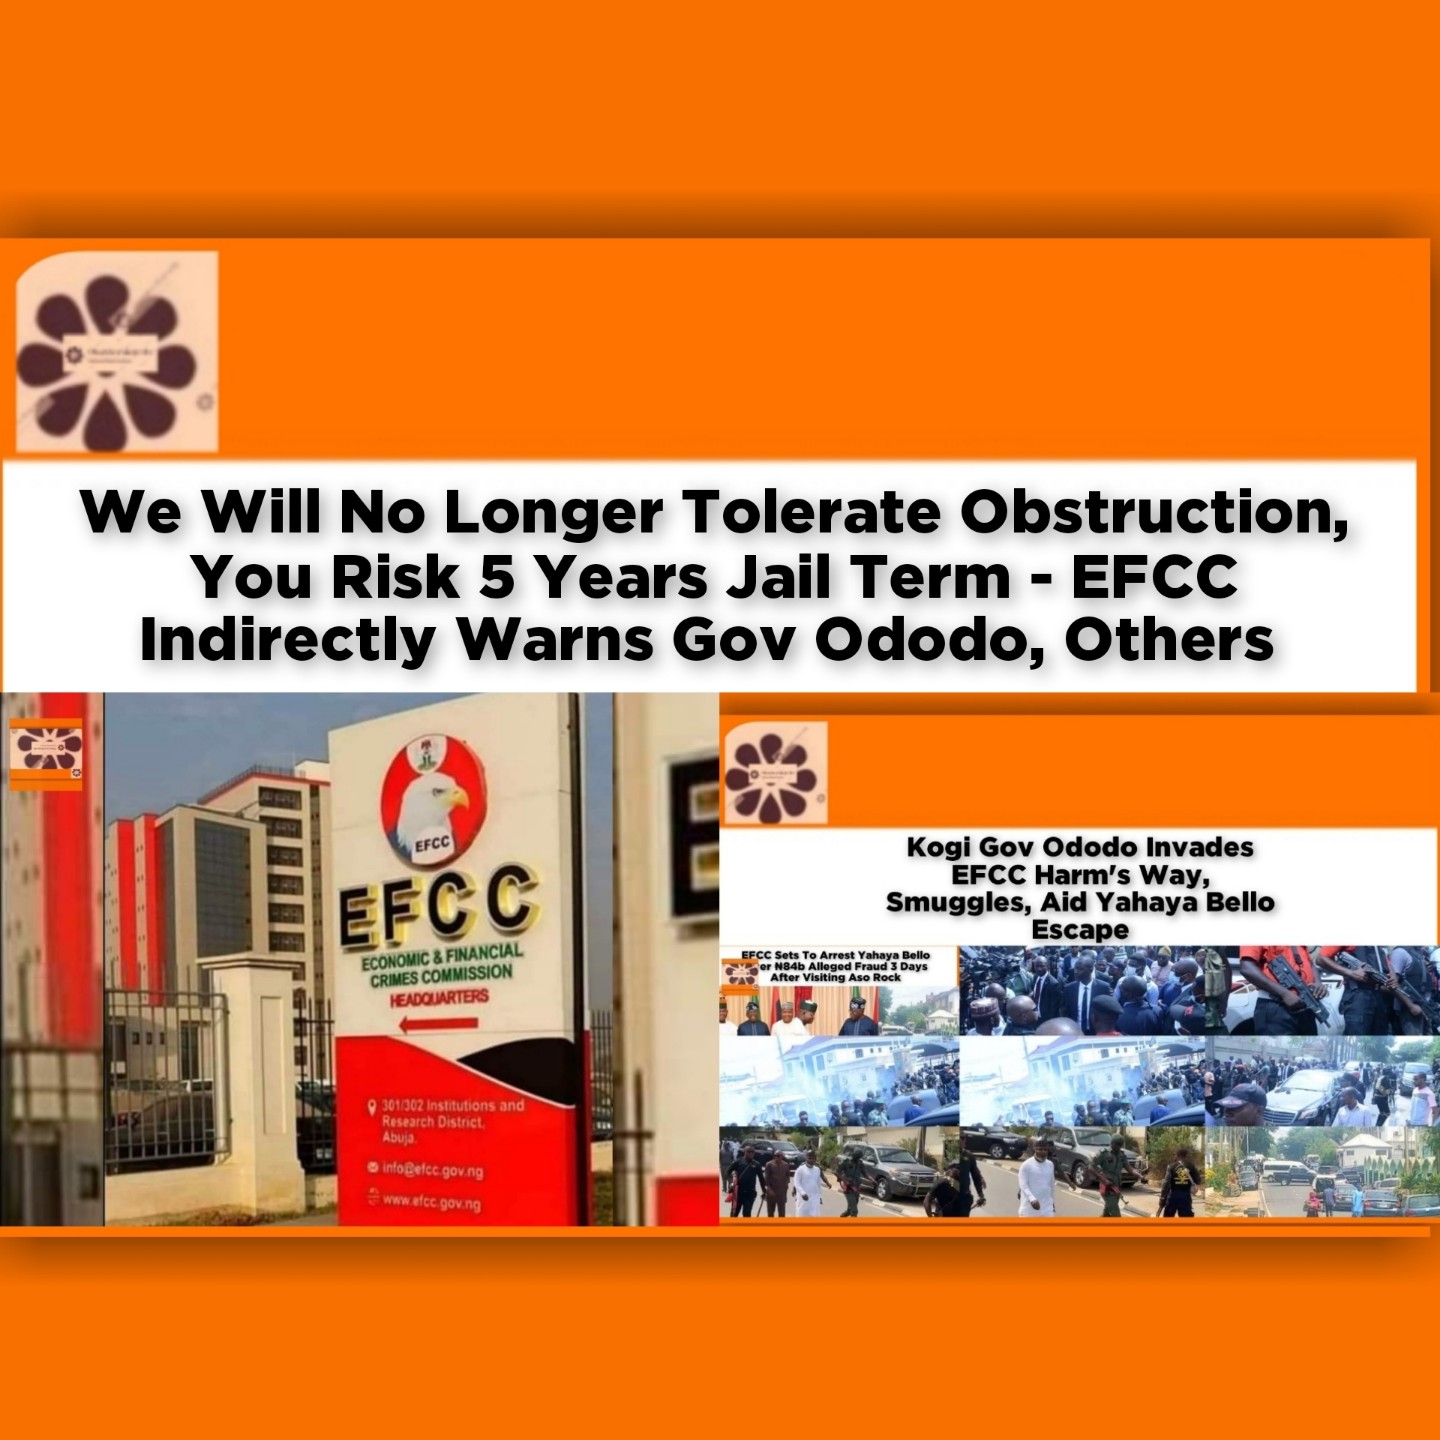 We Will No Longer Tolerate Obstruction, You Risk 5 Years Jail Term - EFCC Indirectly Warns Gov Ododo, Others ~ OsazuwaAkonedo #APGA